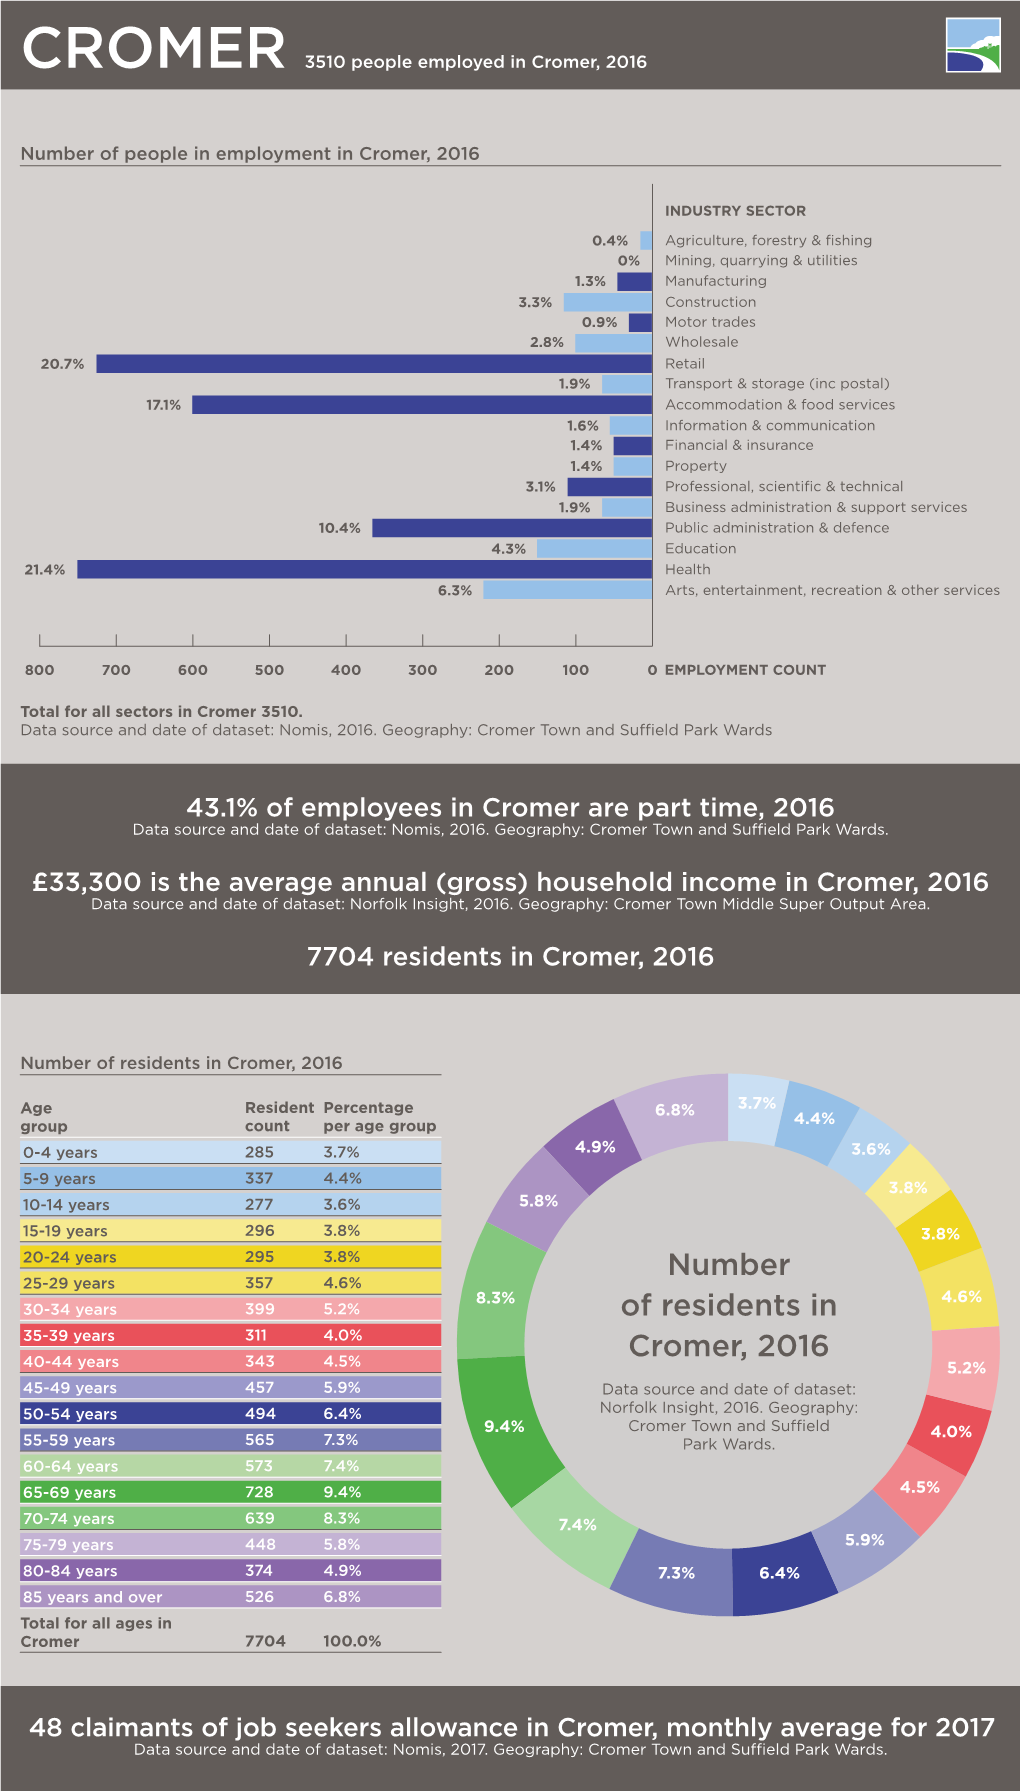 Number of Residents in Cromer, 2016